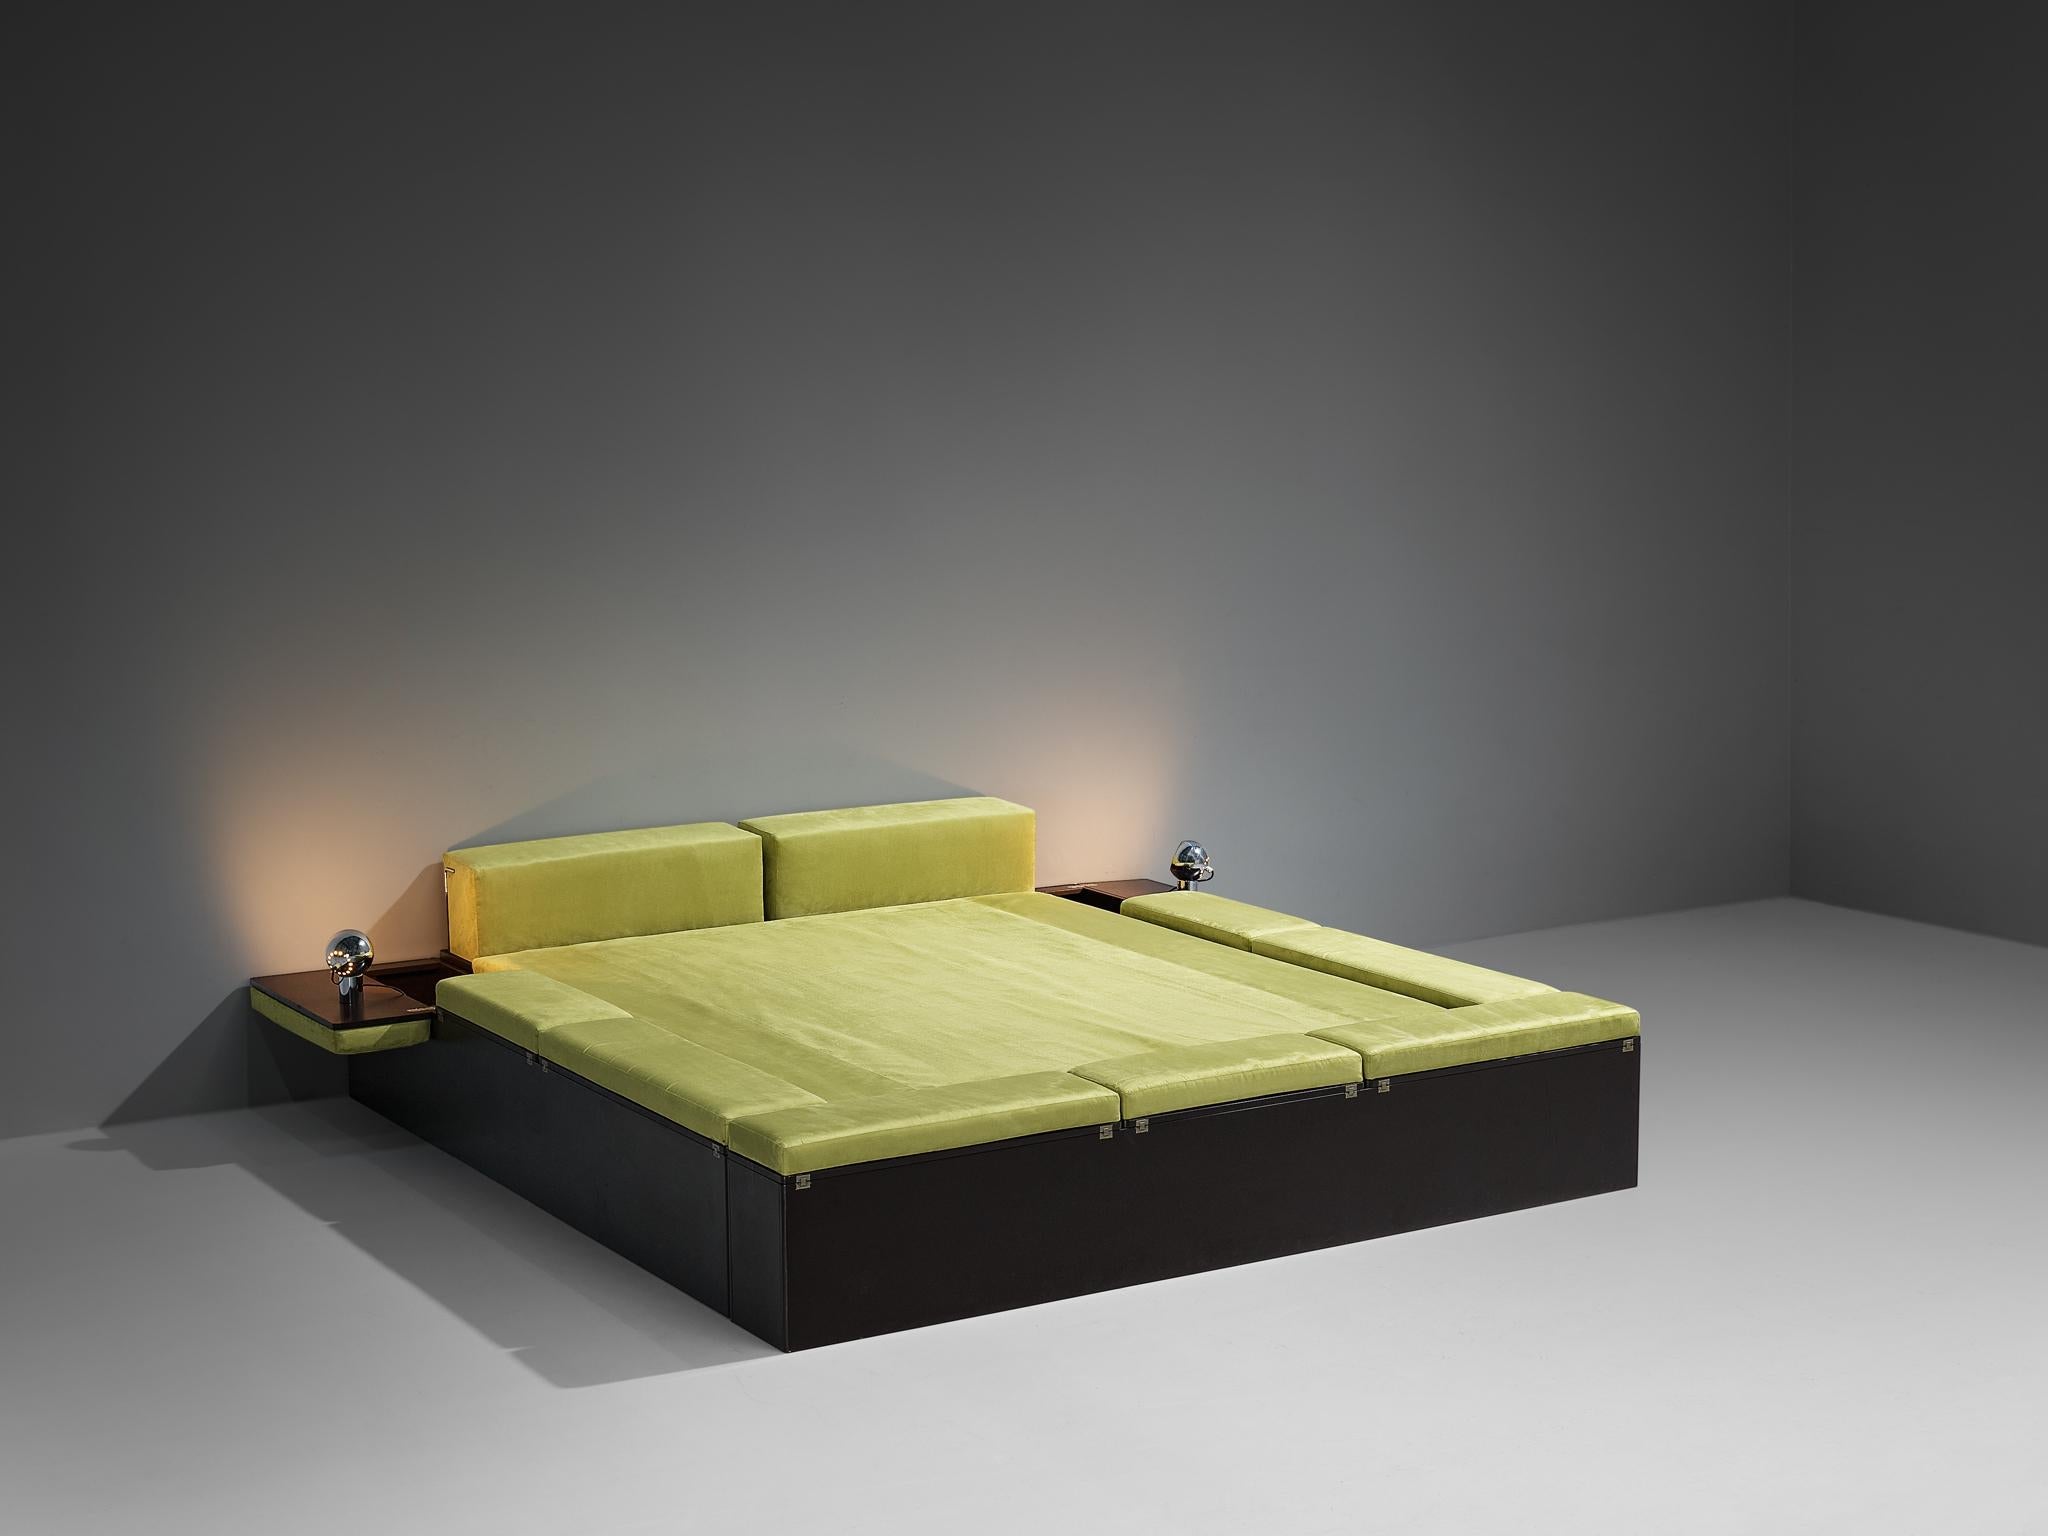 Luciano Bertoncini for Cjfra 'Zattera' Bed in Alcantara and Lacquered Wood